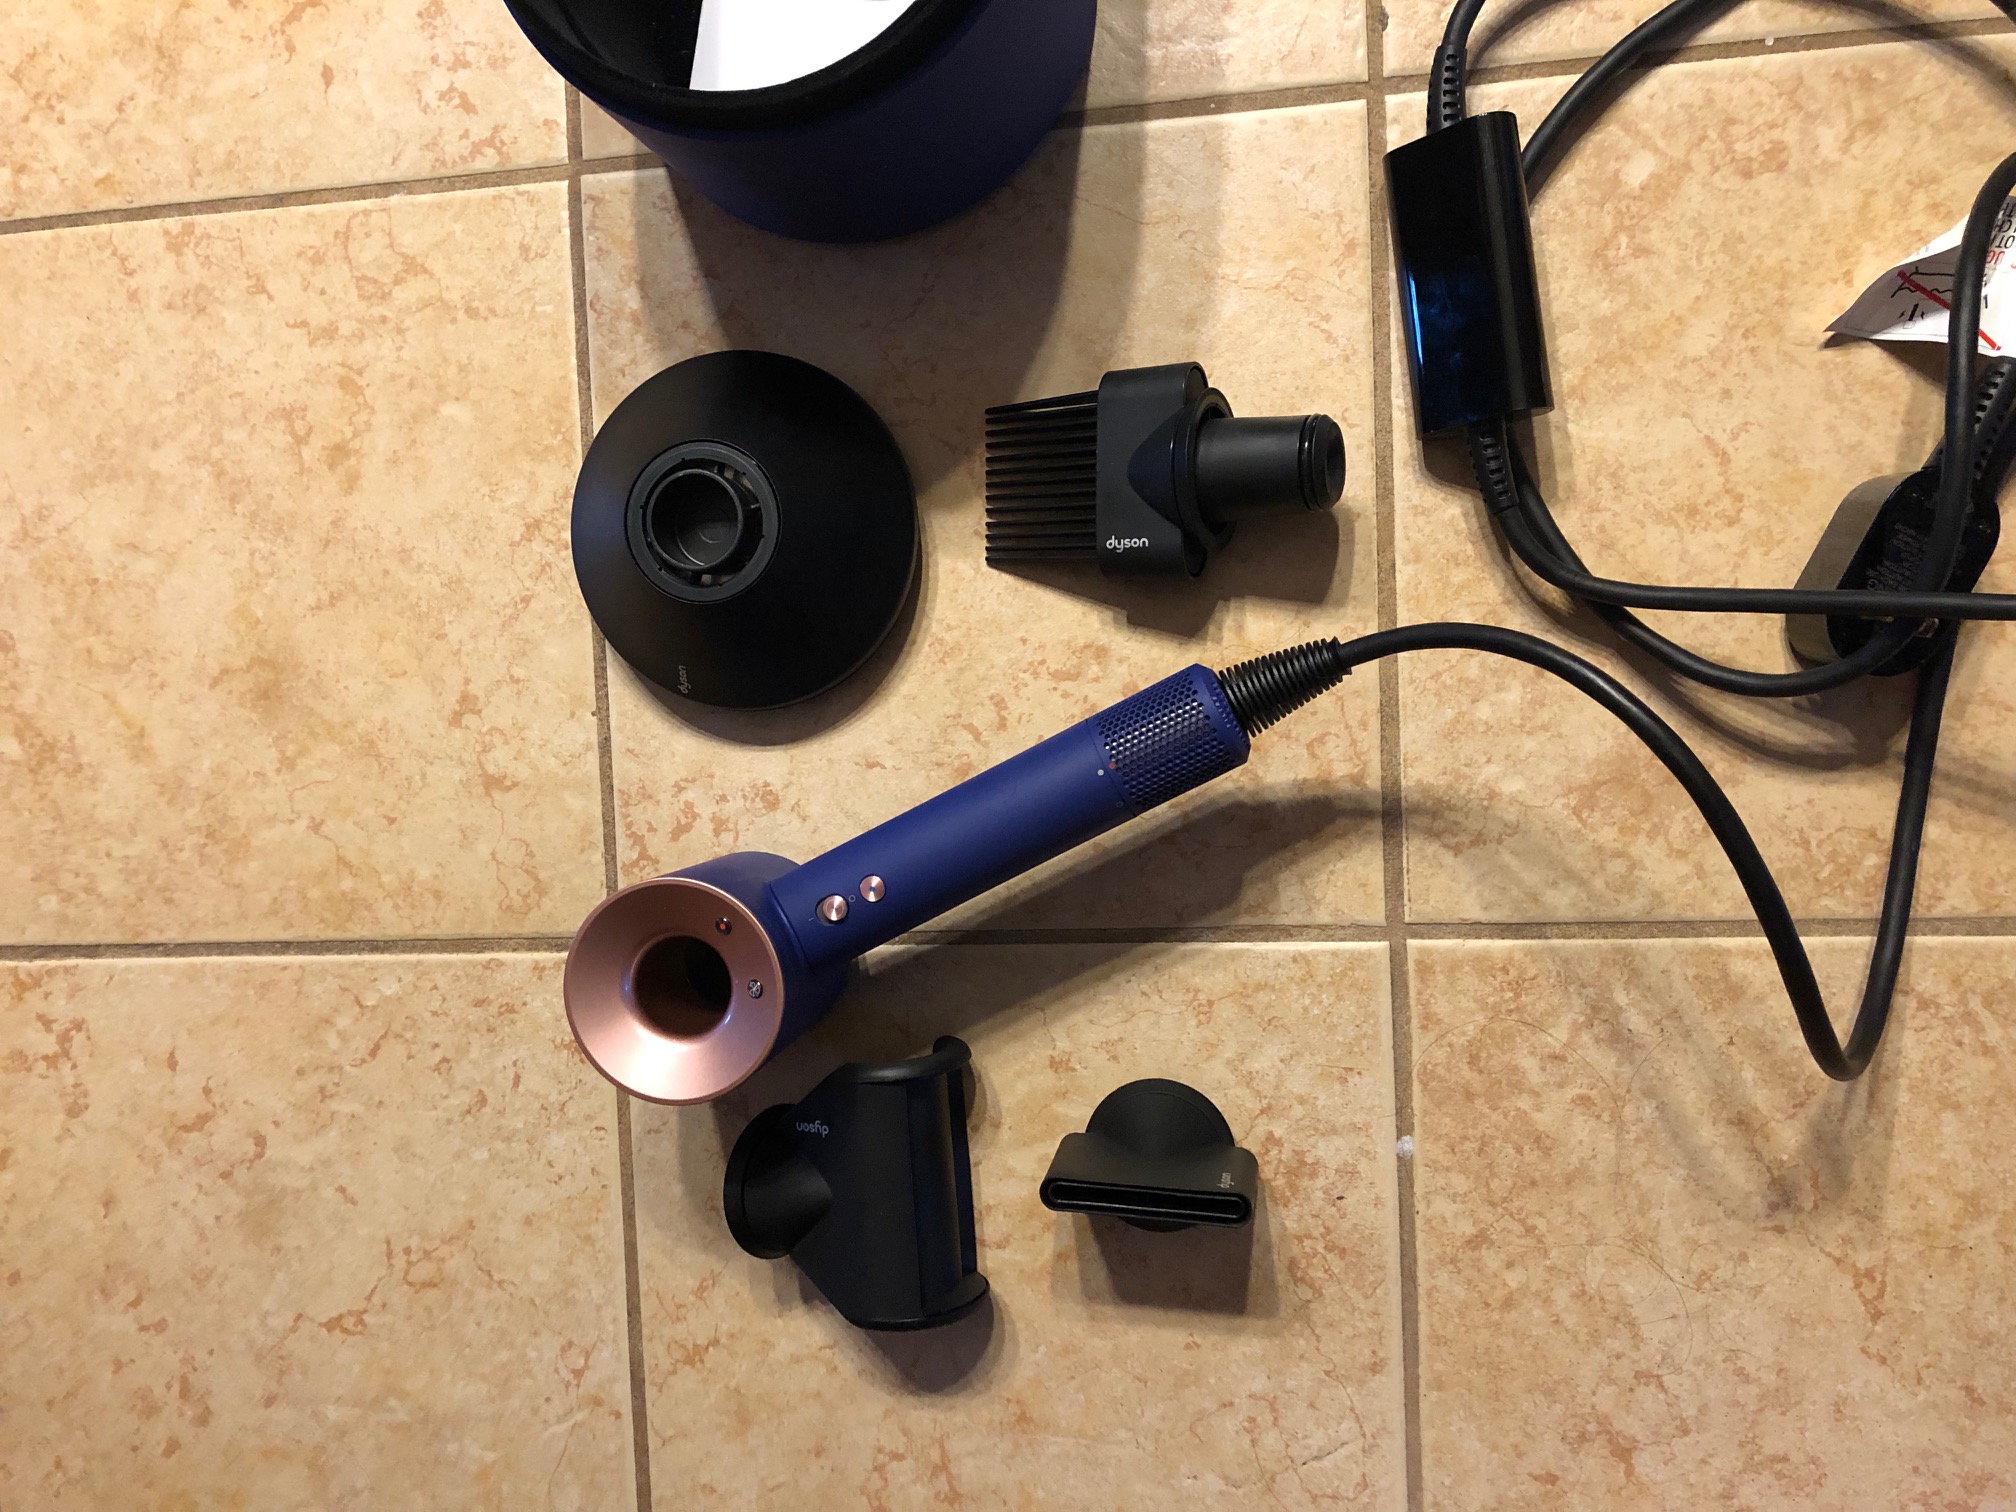 Dyson Supersonic Hair Dryer Aerial View with Attachments